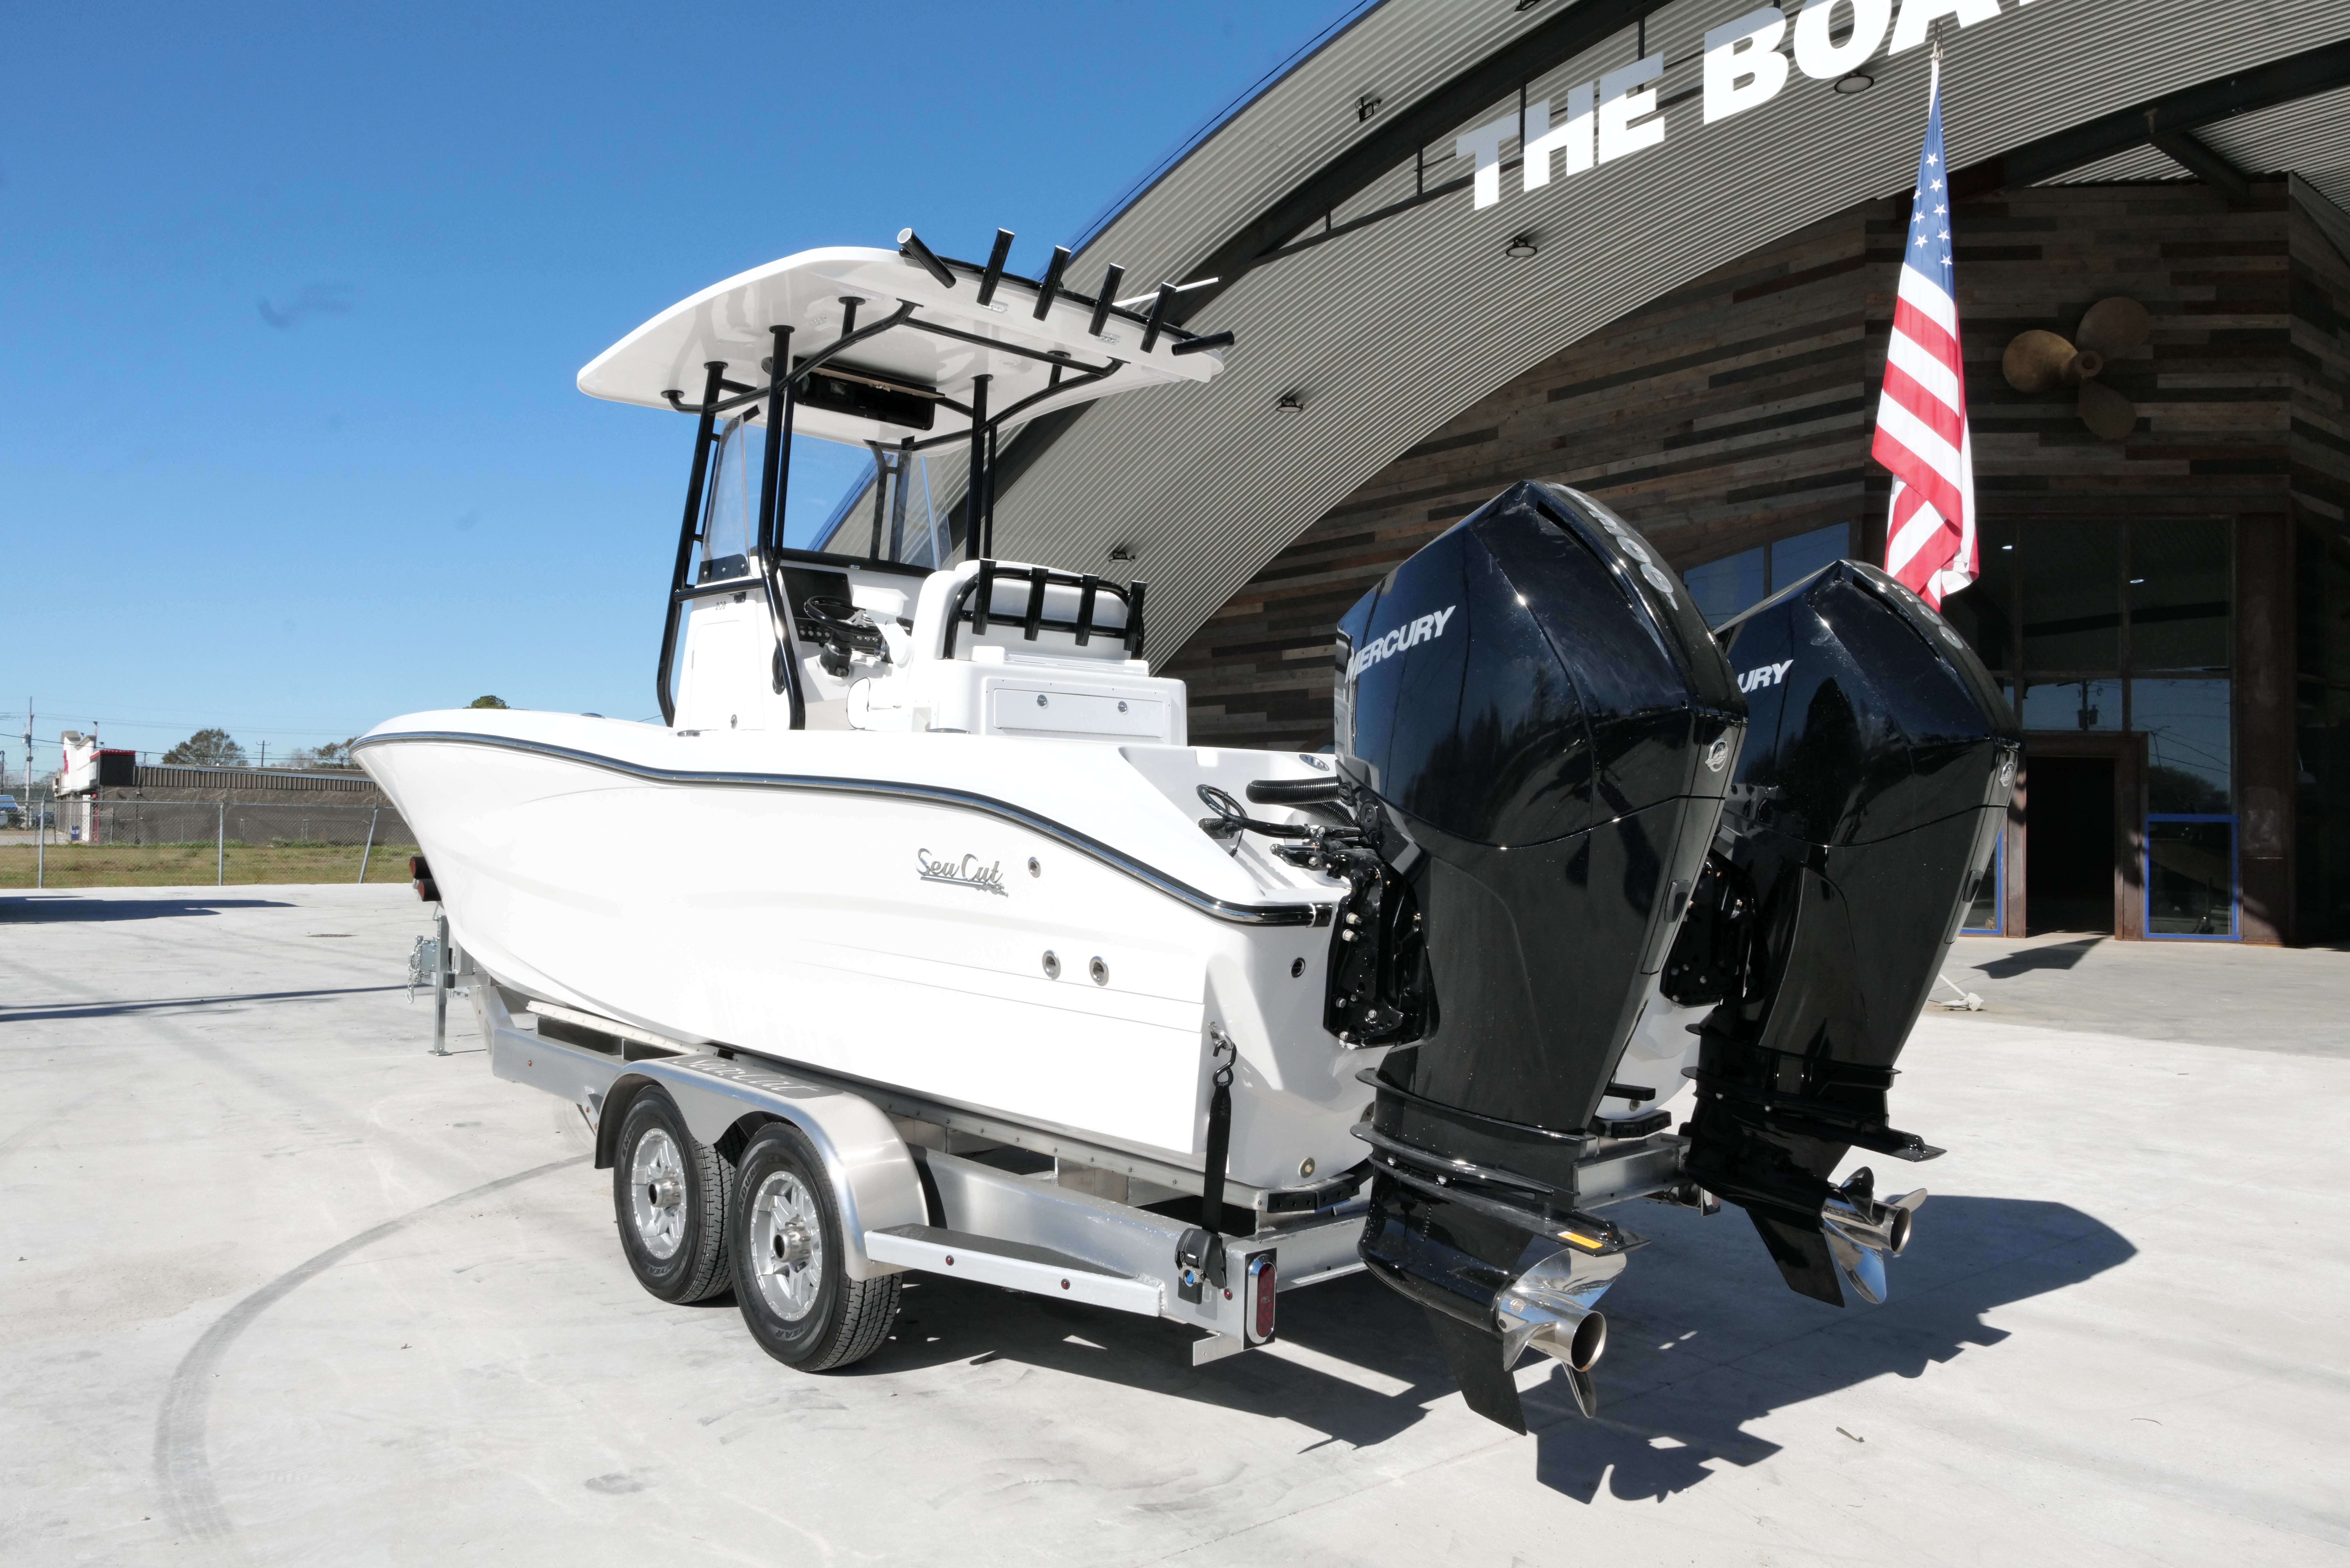 2021 Sea Cat boat for sale, model of the boat is 260 & Image # 12 of 16